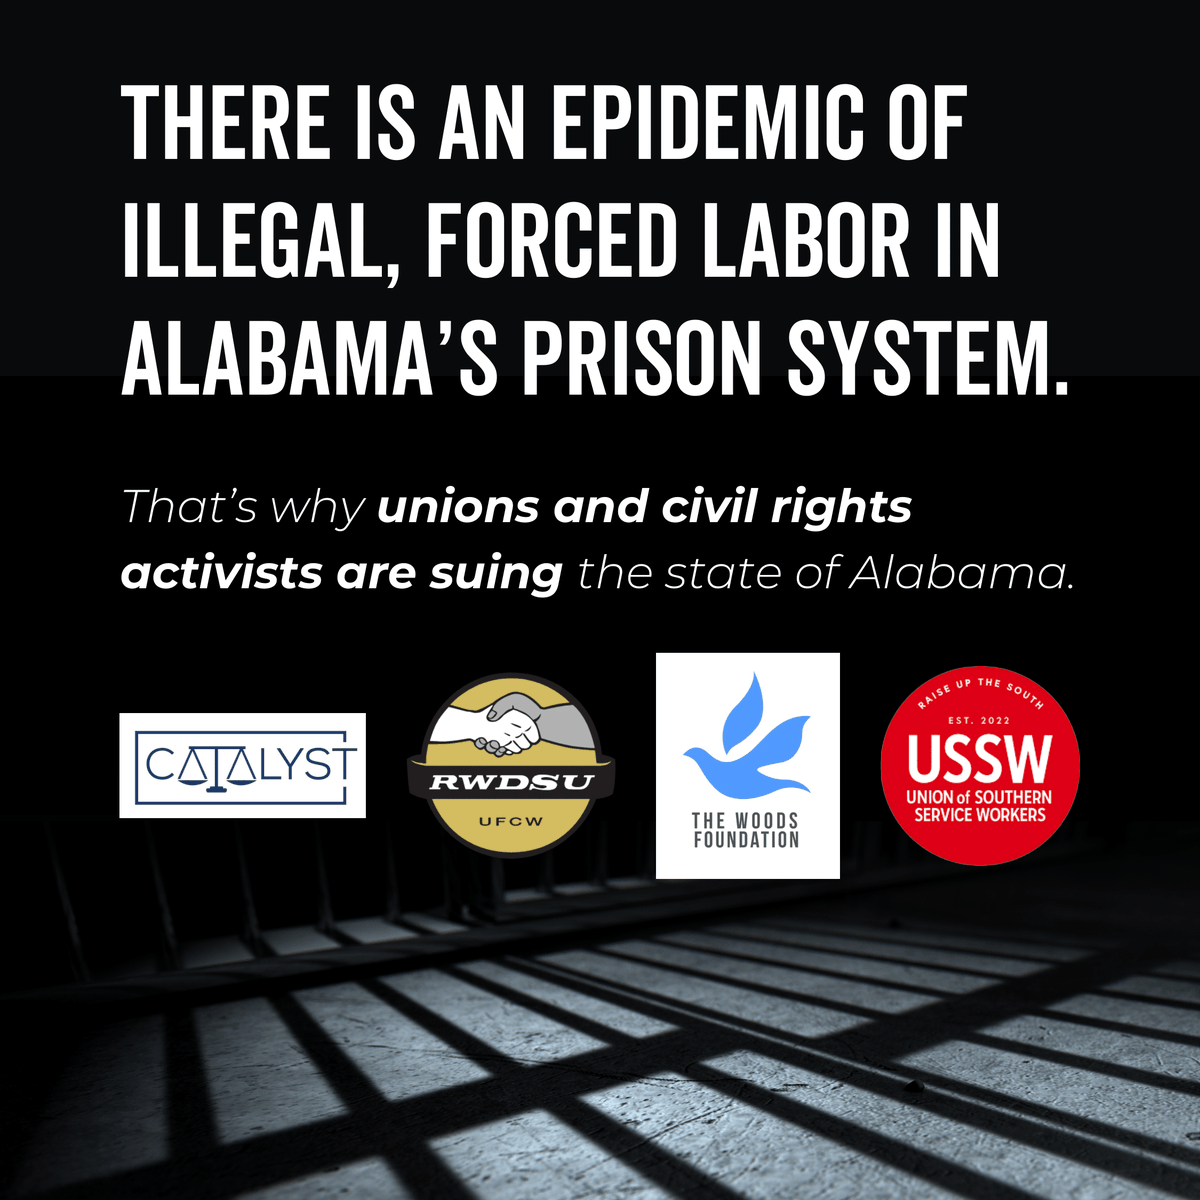 There is an epidemic of illegal, forced labor in Alabama’s prison system.